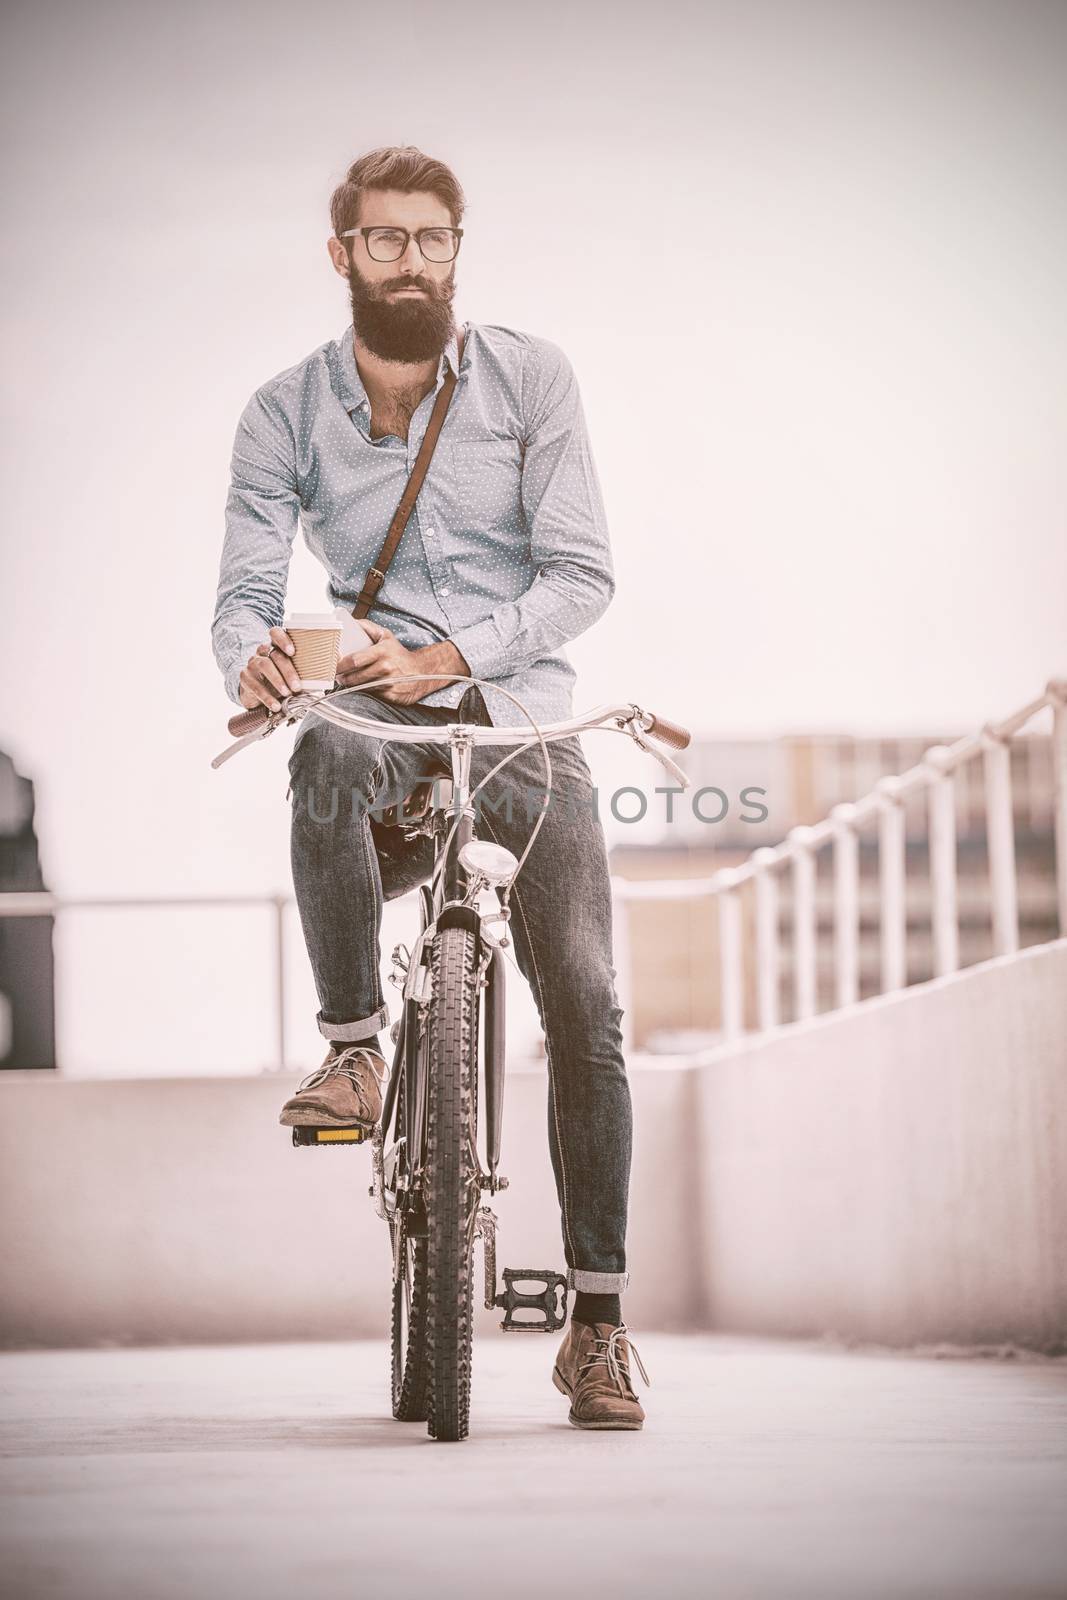 Hipster posing on his bike in a balcony